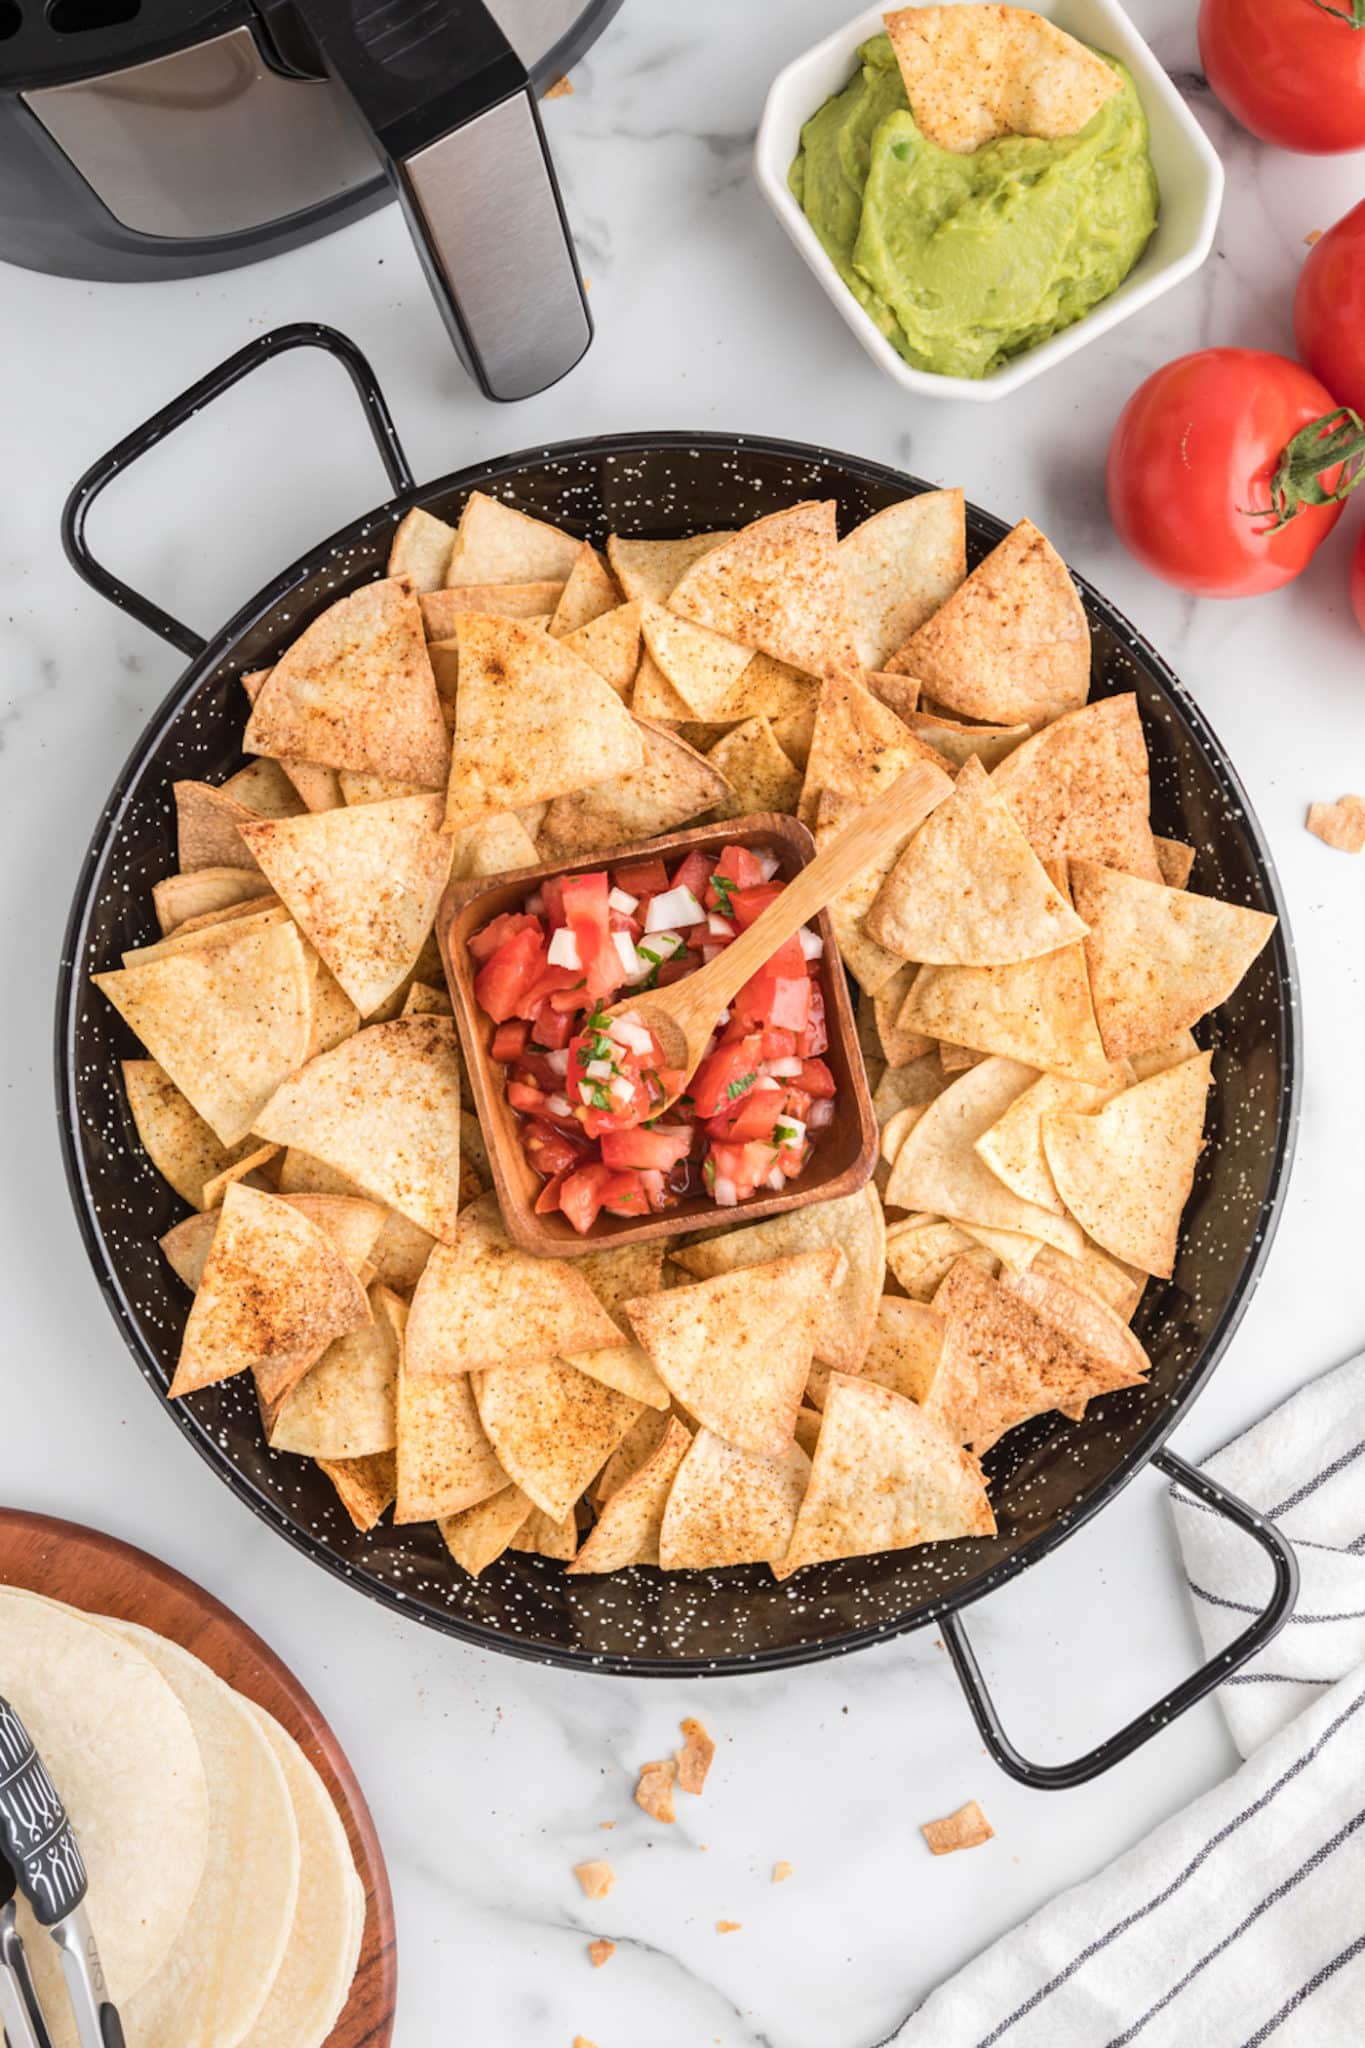 Top view of a large black platter of fresh tortilla chips surrounding a bowl of salsa.